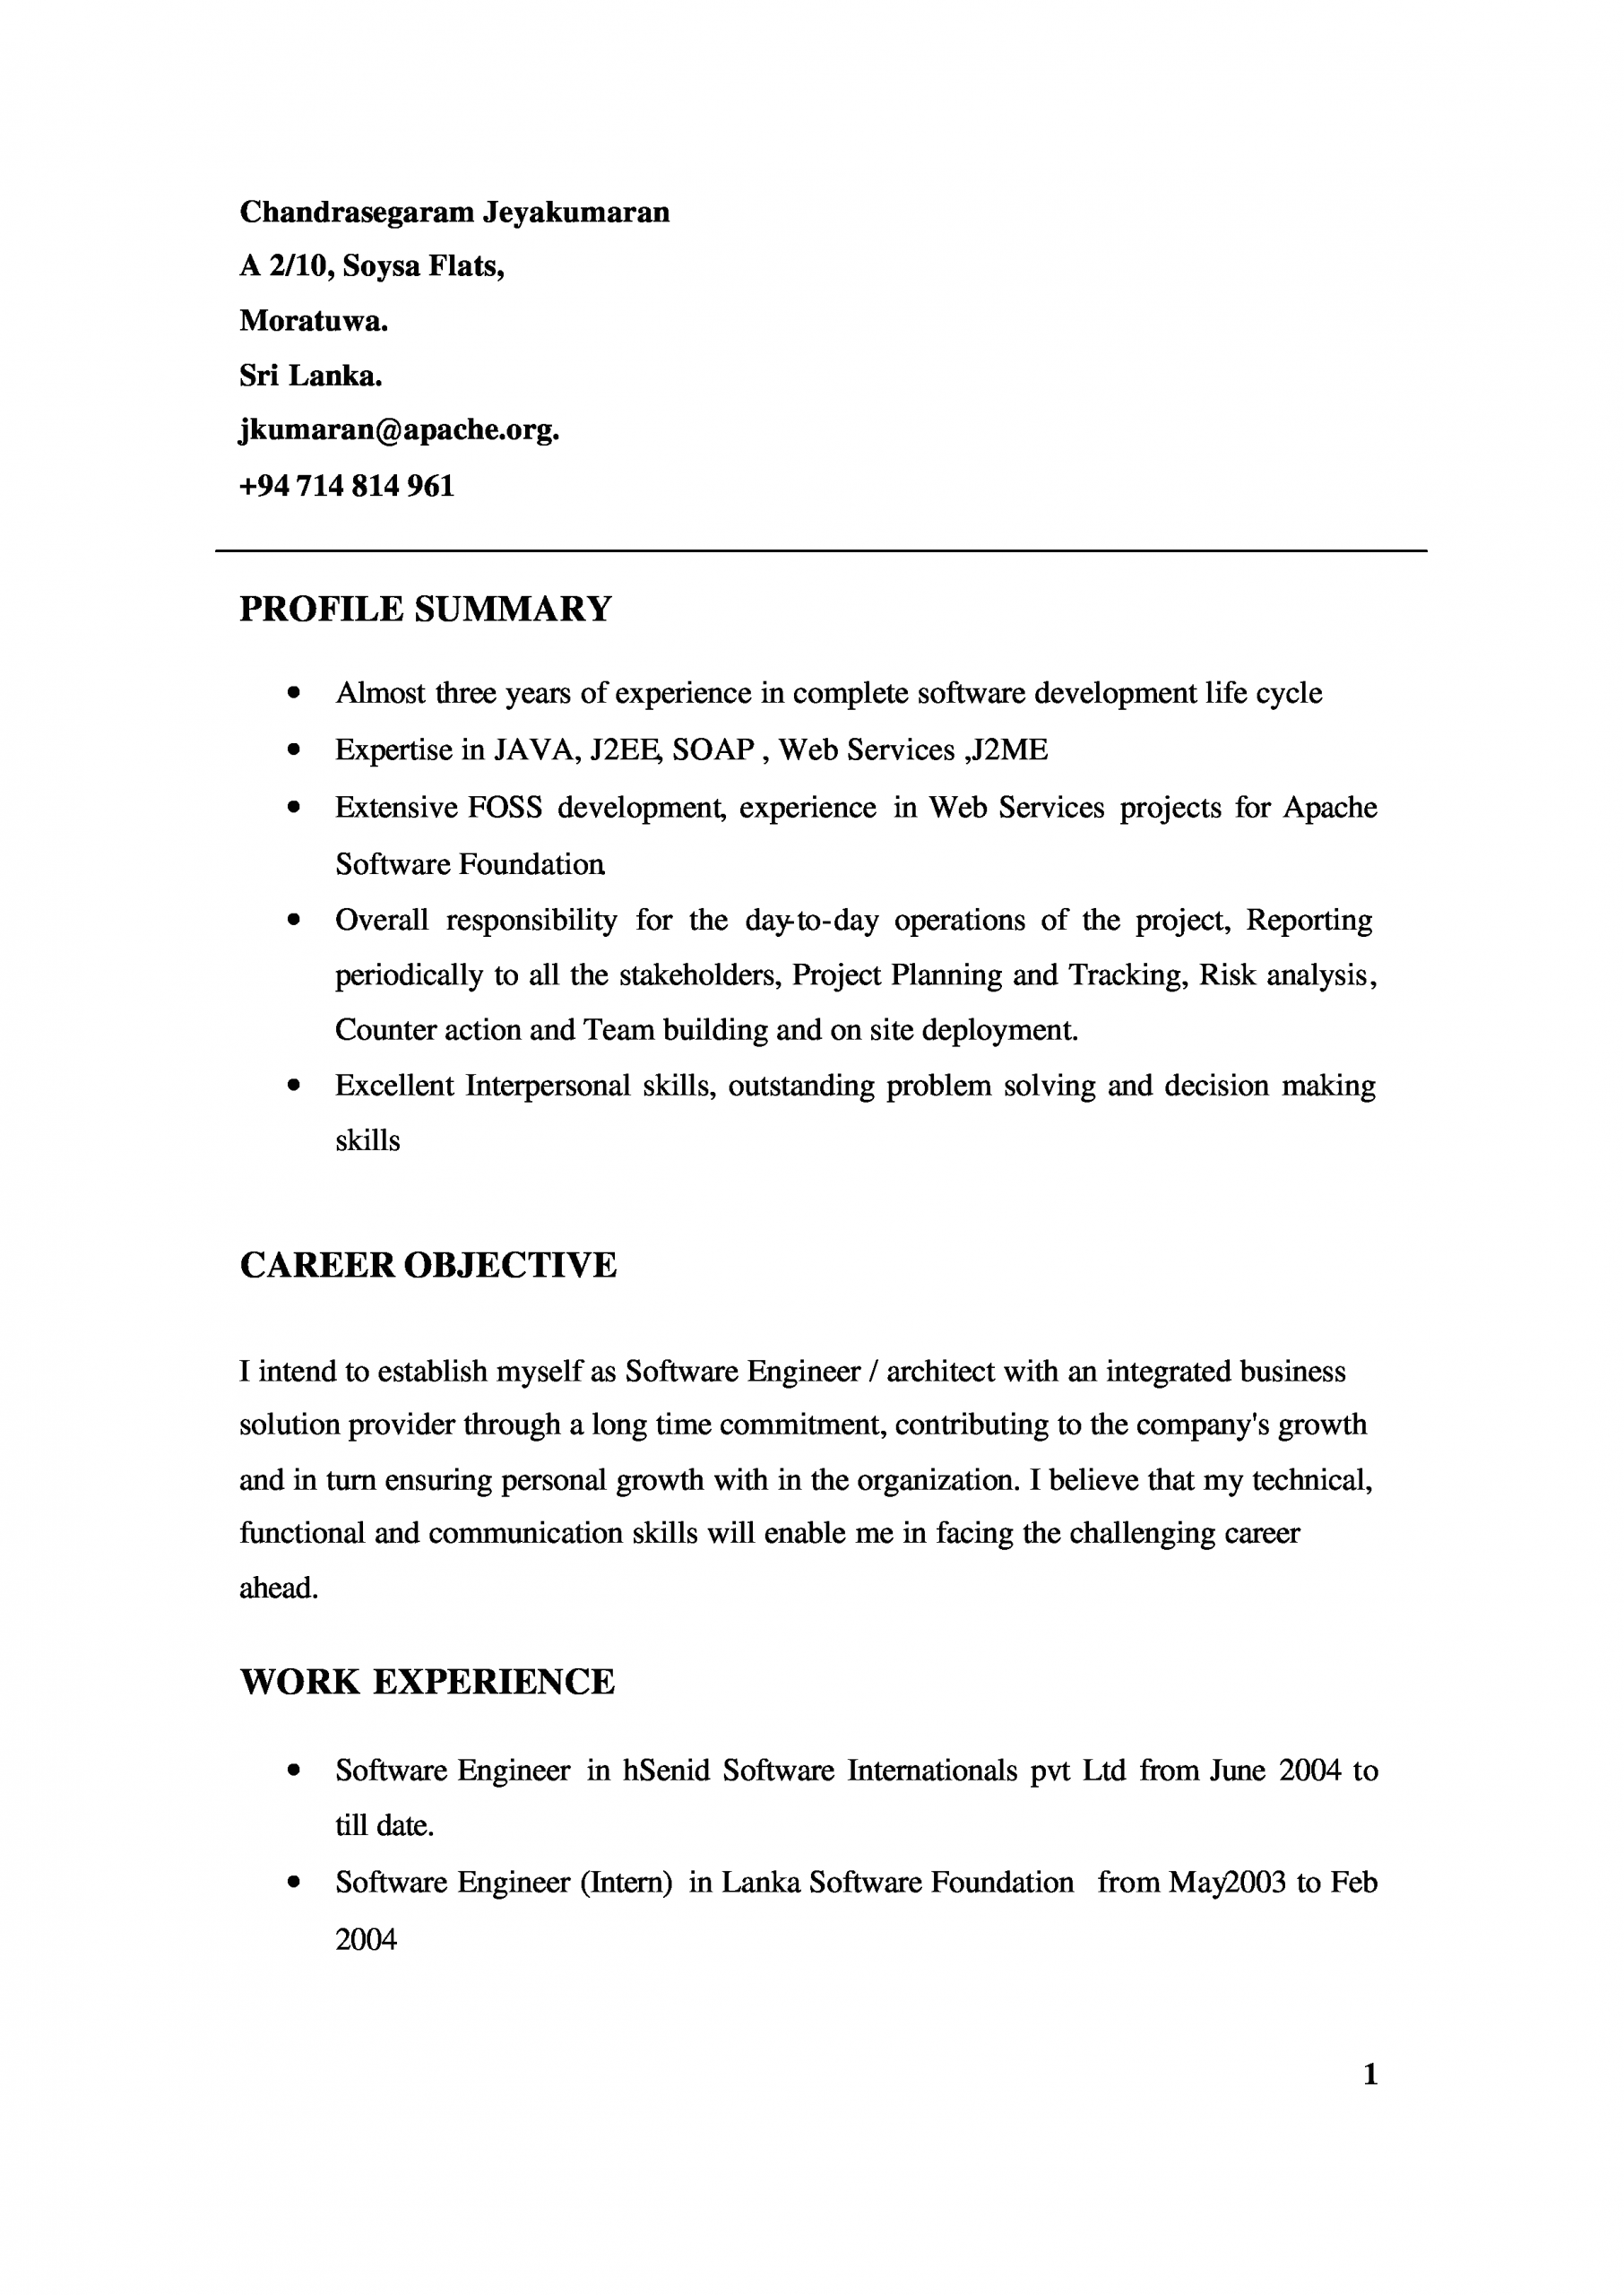 Sample Resume with Diverse Work Experience It Work Experience Resume Sample How to Draft An It Work